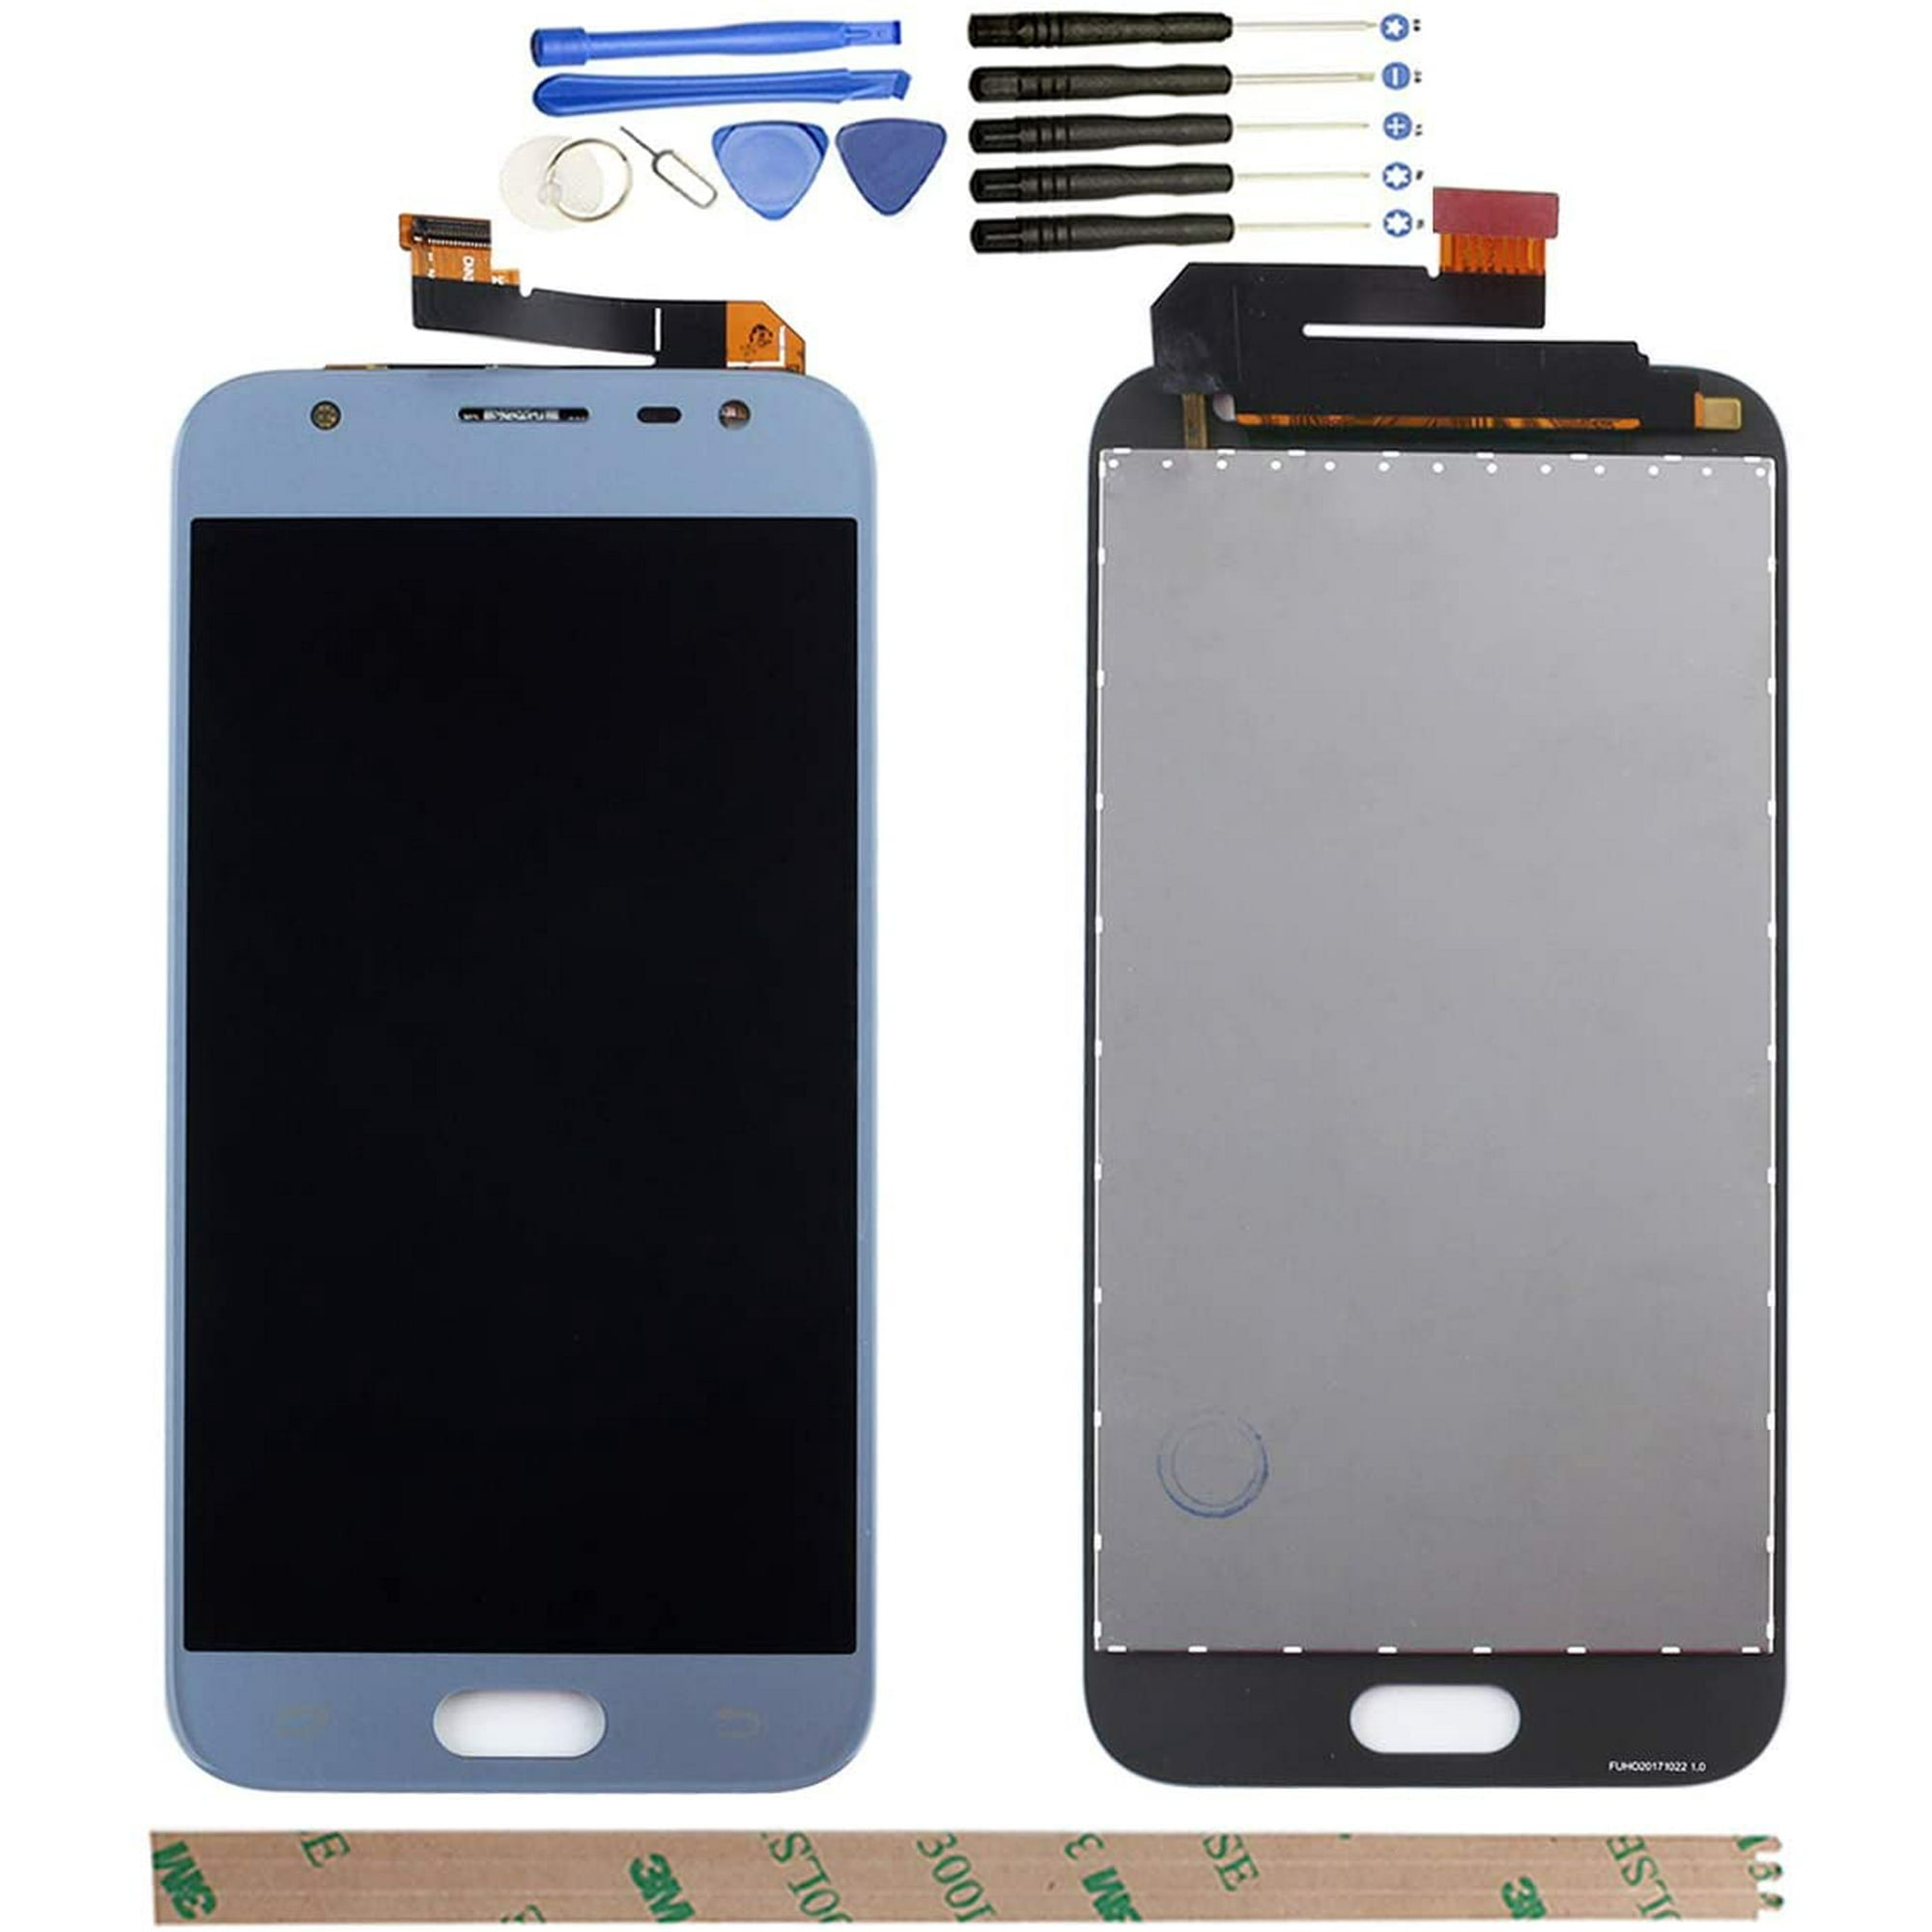 Hyyt Replacement For Samsung Galaxy J3 17 J3 Pro J330 J330f Ds Sm J330 5 0 Lcd Display Touch Screen Digitizer Walmart Canada